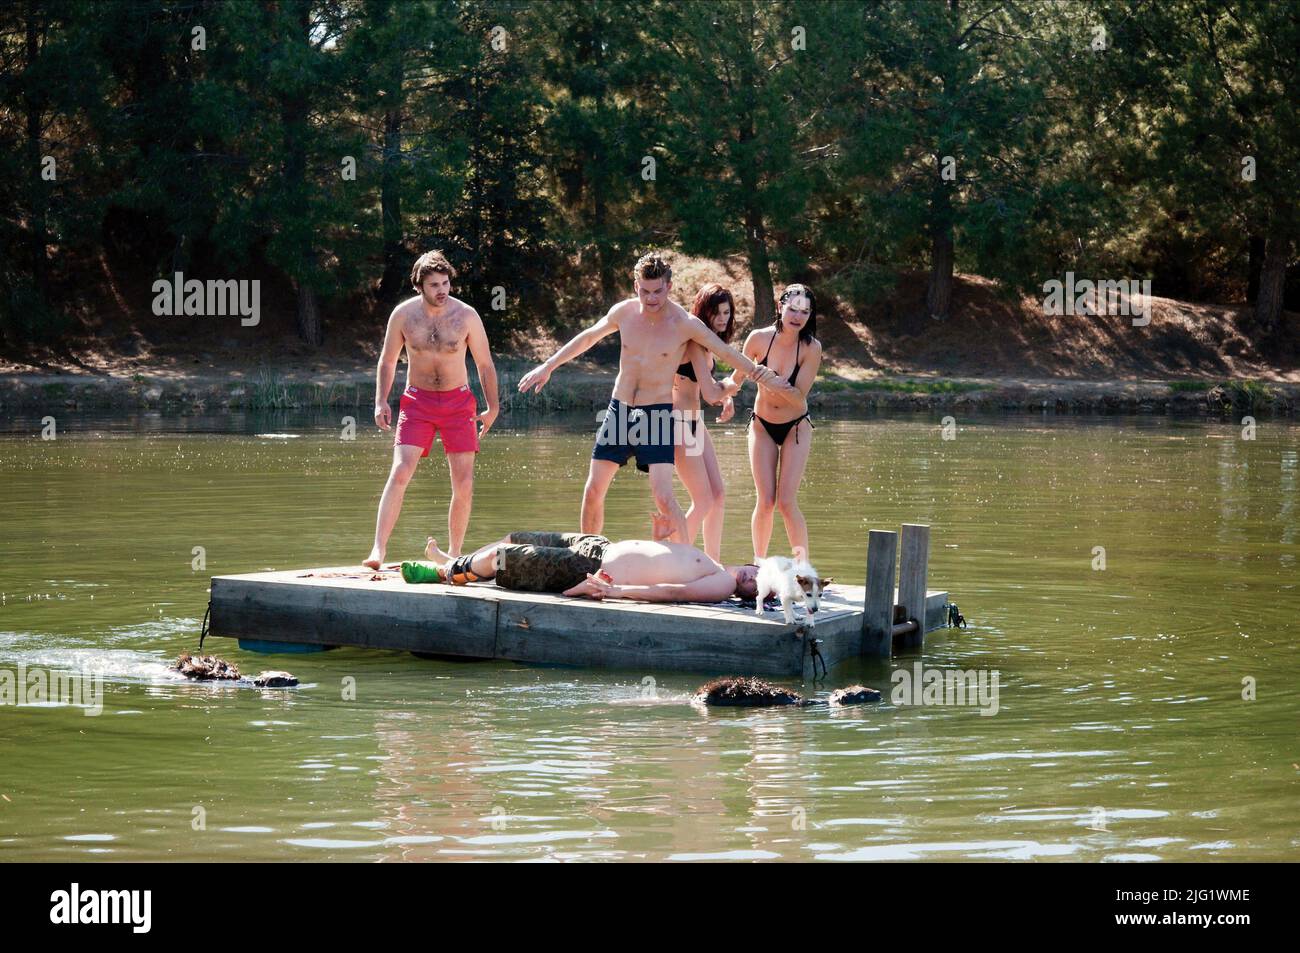 WEARY,DANO,PALM,MELVIN, ZOMBEAVERS, 2014 Banque D'Images